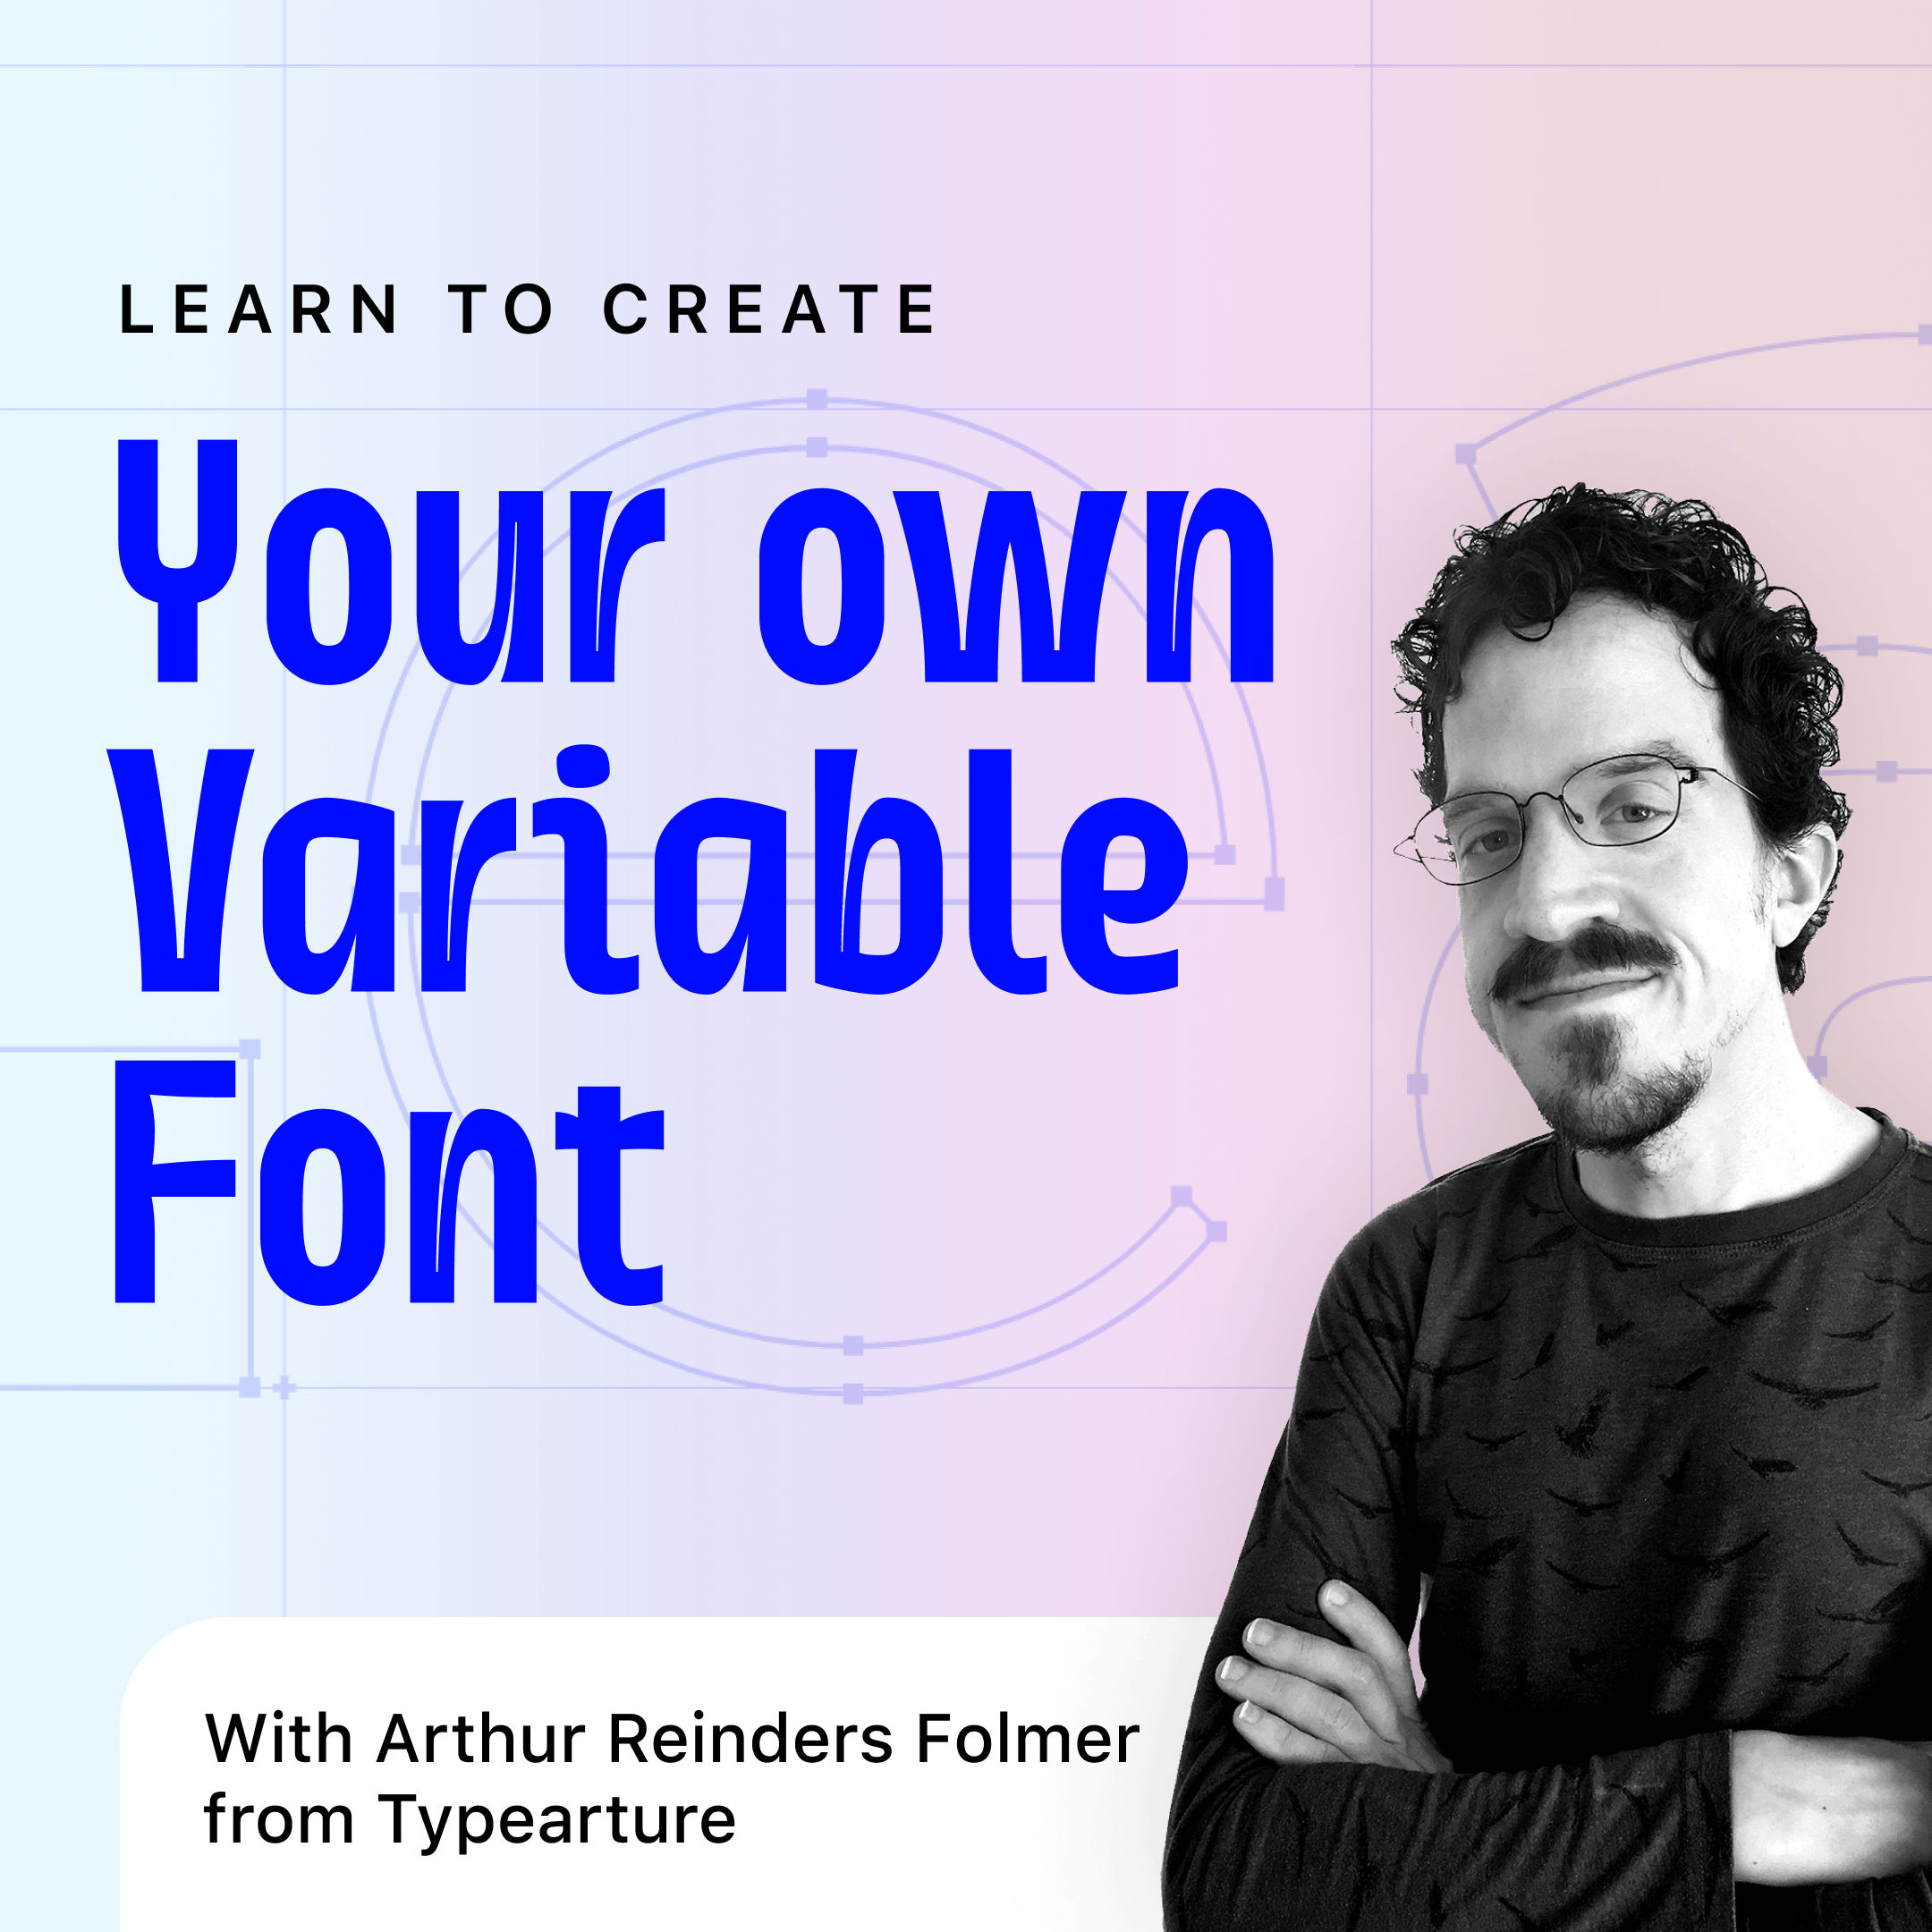 Variable Font Course